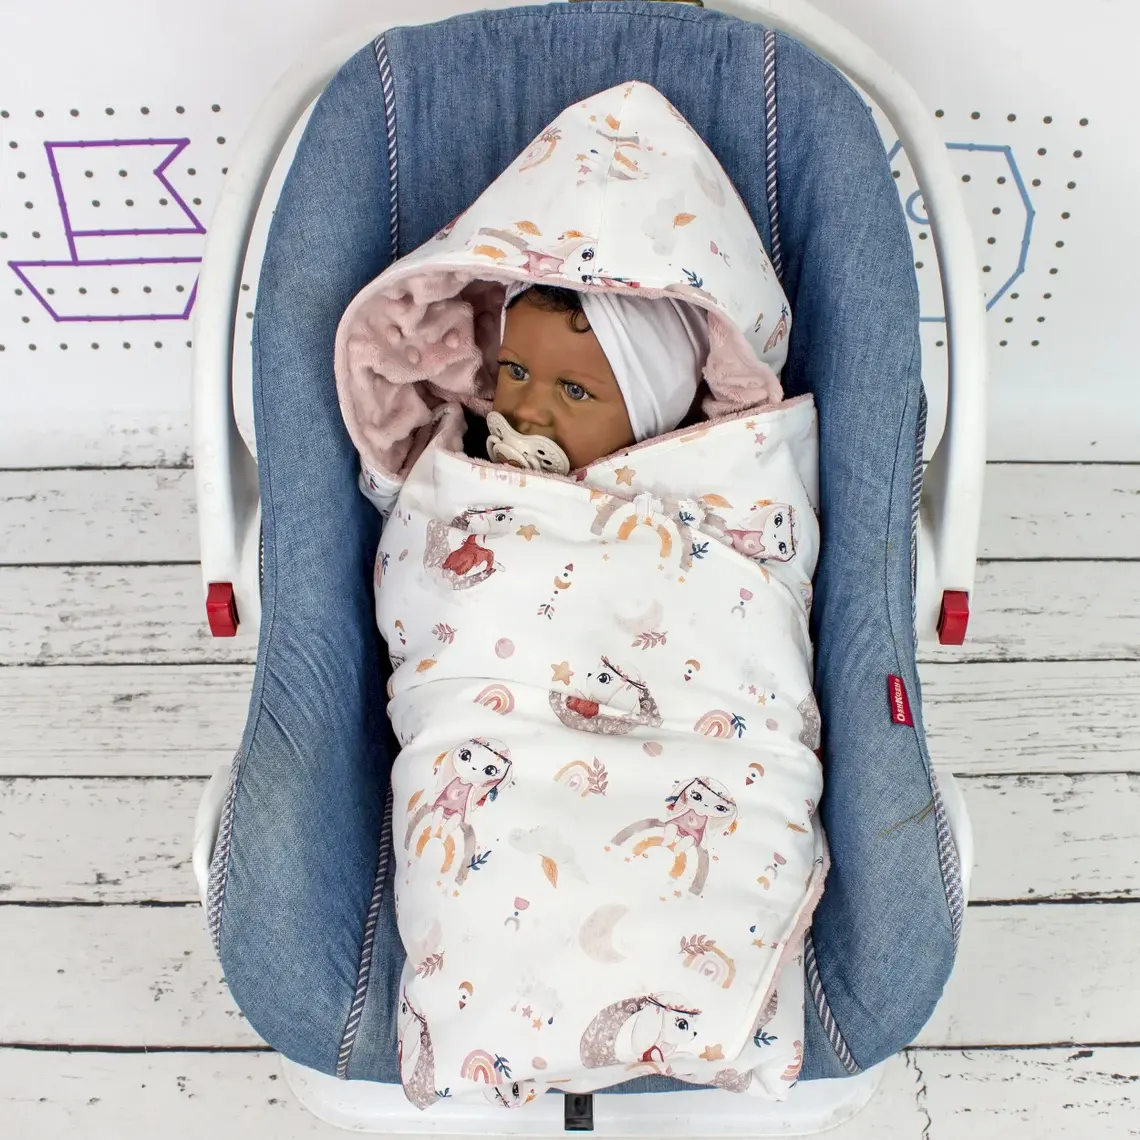 Small MOQ Super Soft Warm Cuddle Print Organic Cotton Minky Dot Hooded Car Seat Blanket Suit For 3 Point Harnesses